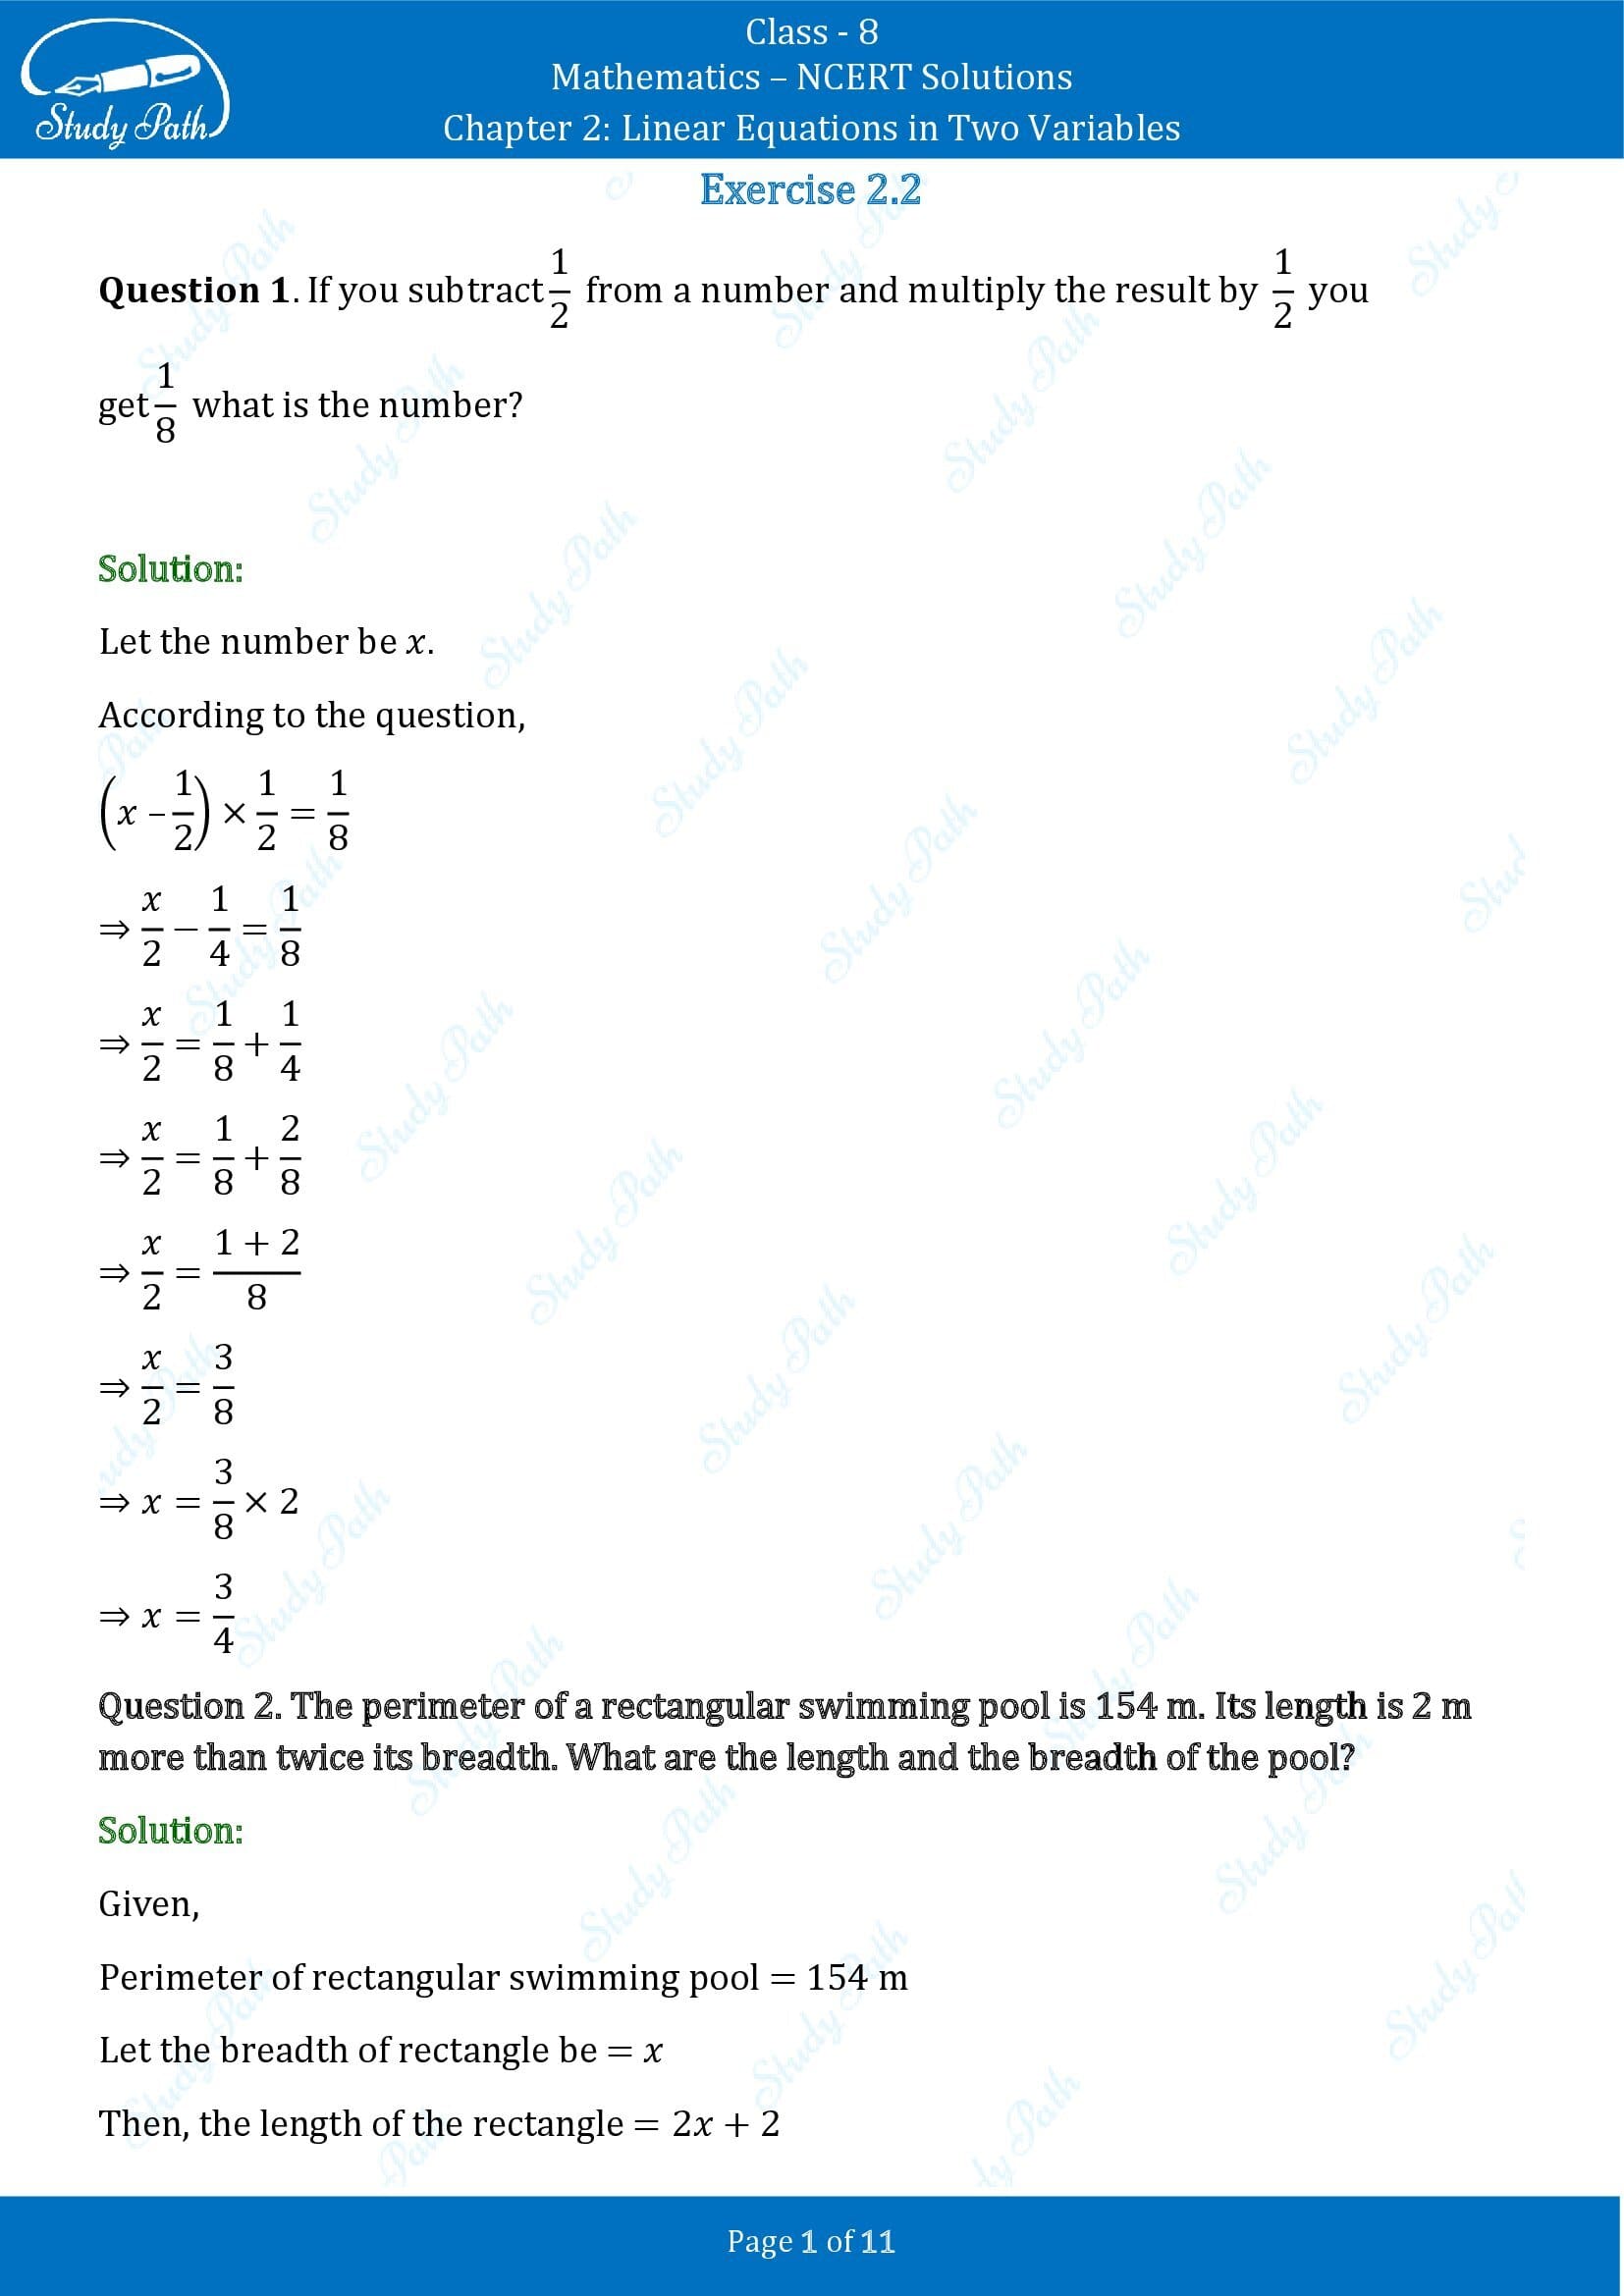 NCERT Solutions for Class 8 Maths Chapter 2 Linear Equations in Two Variables Exercise 2.2 00001